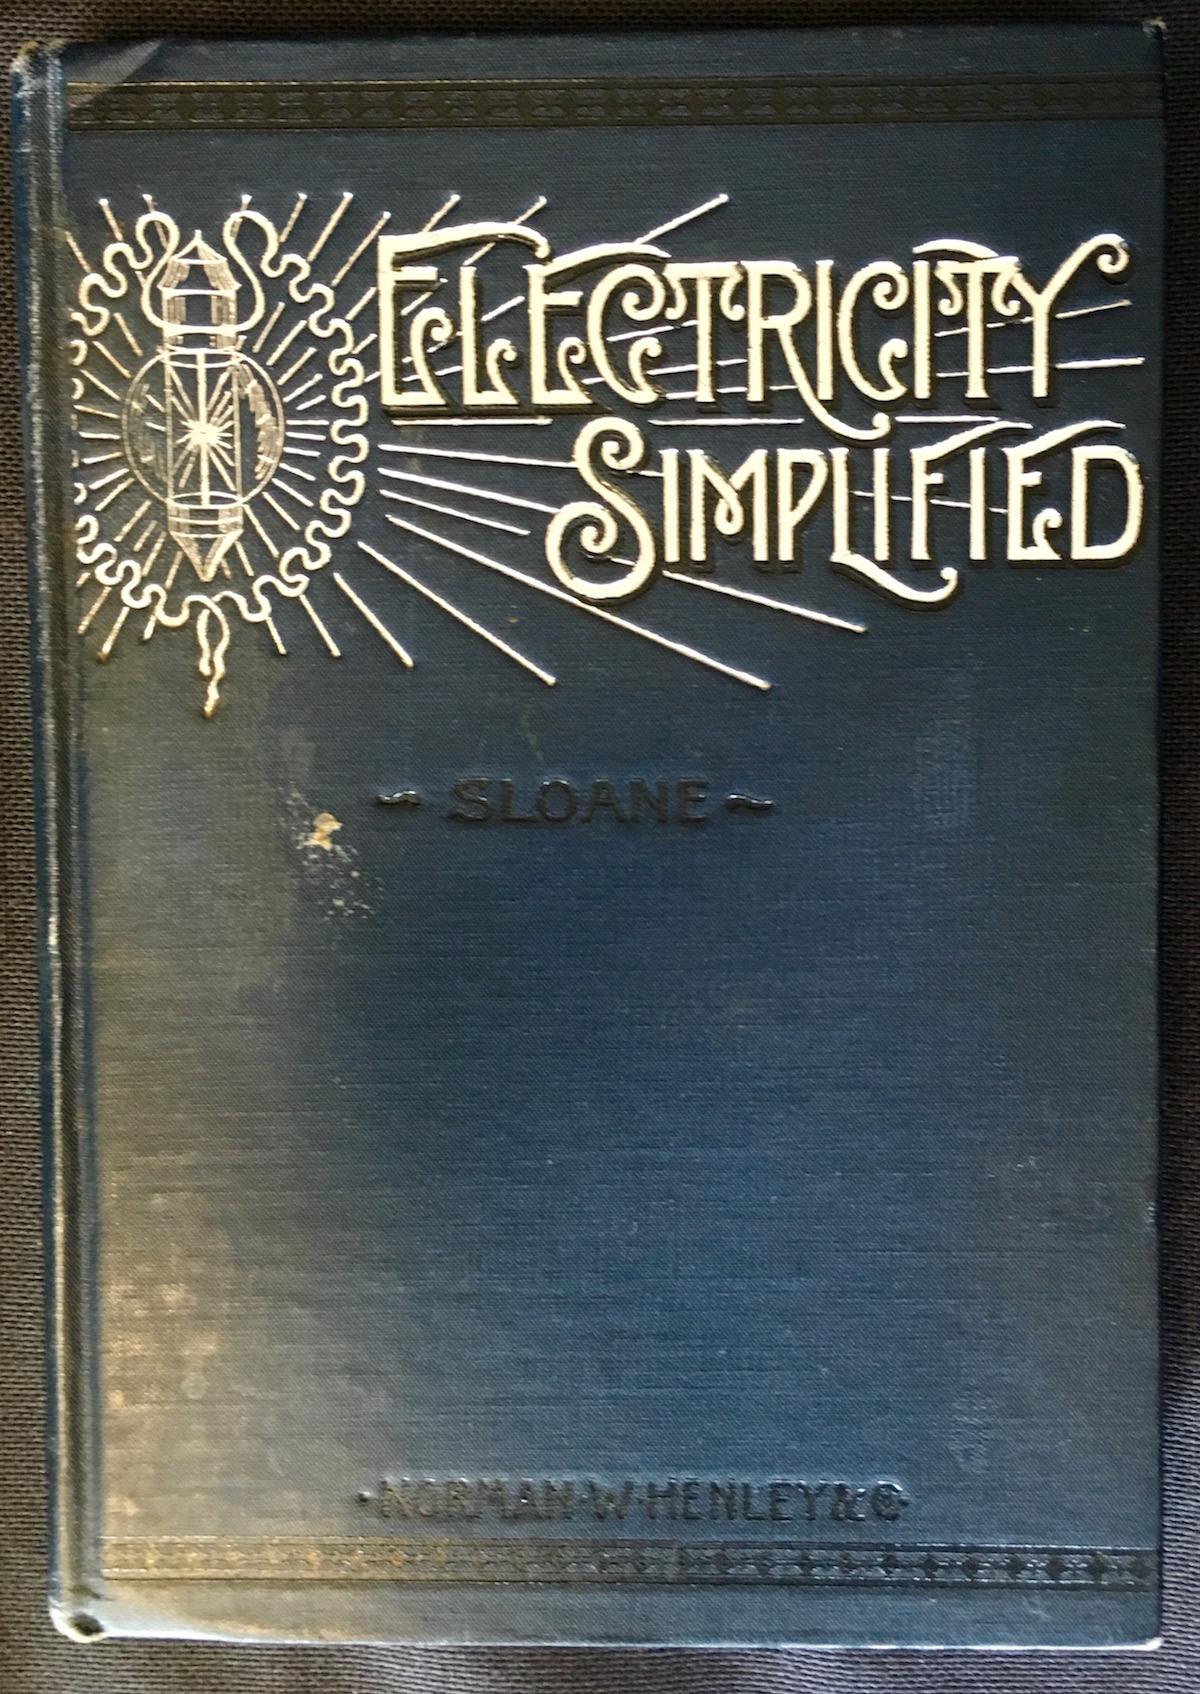 Electricity Simplified, 1911.